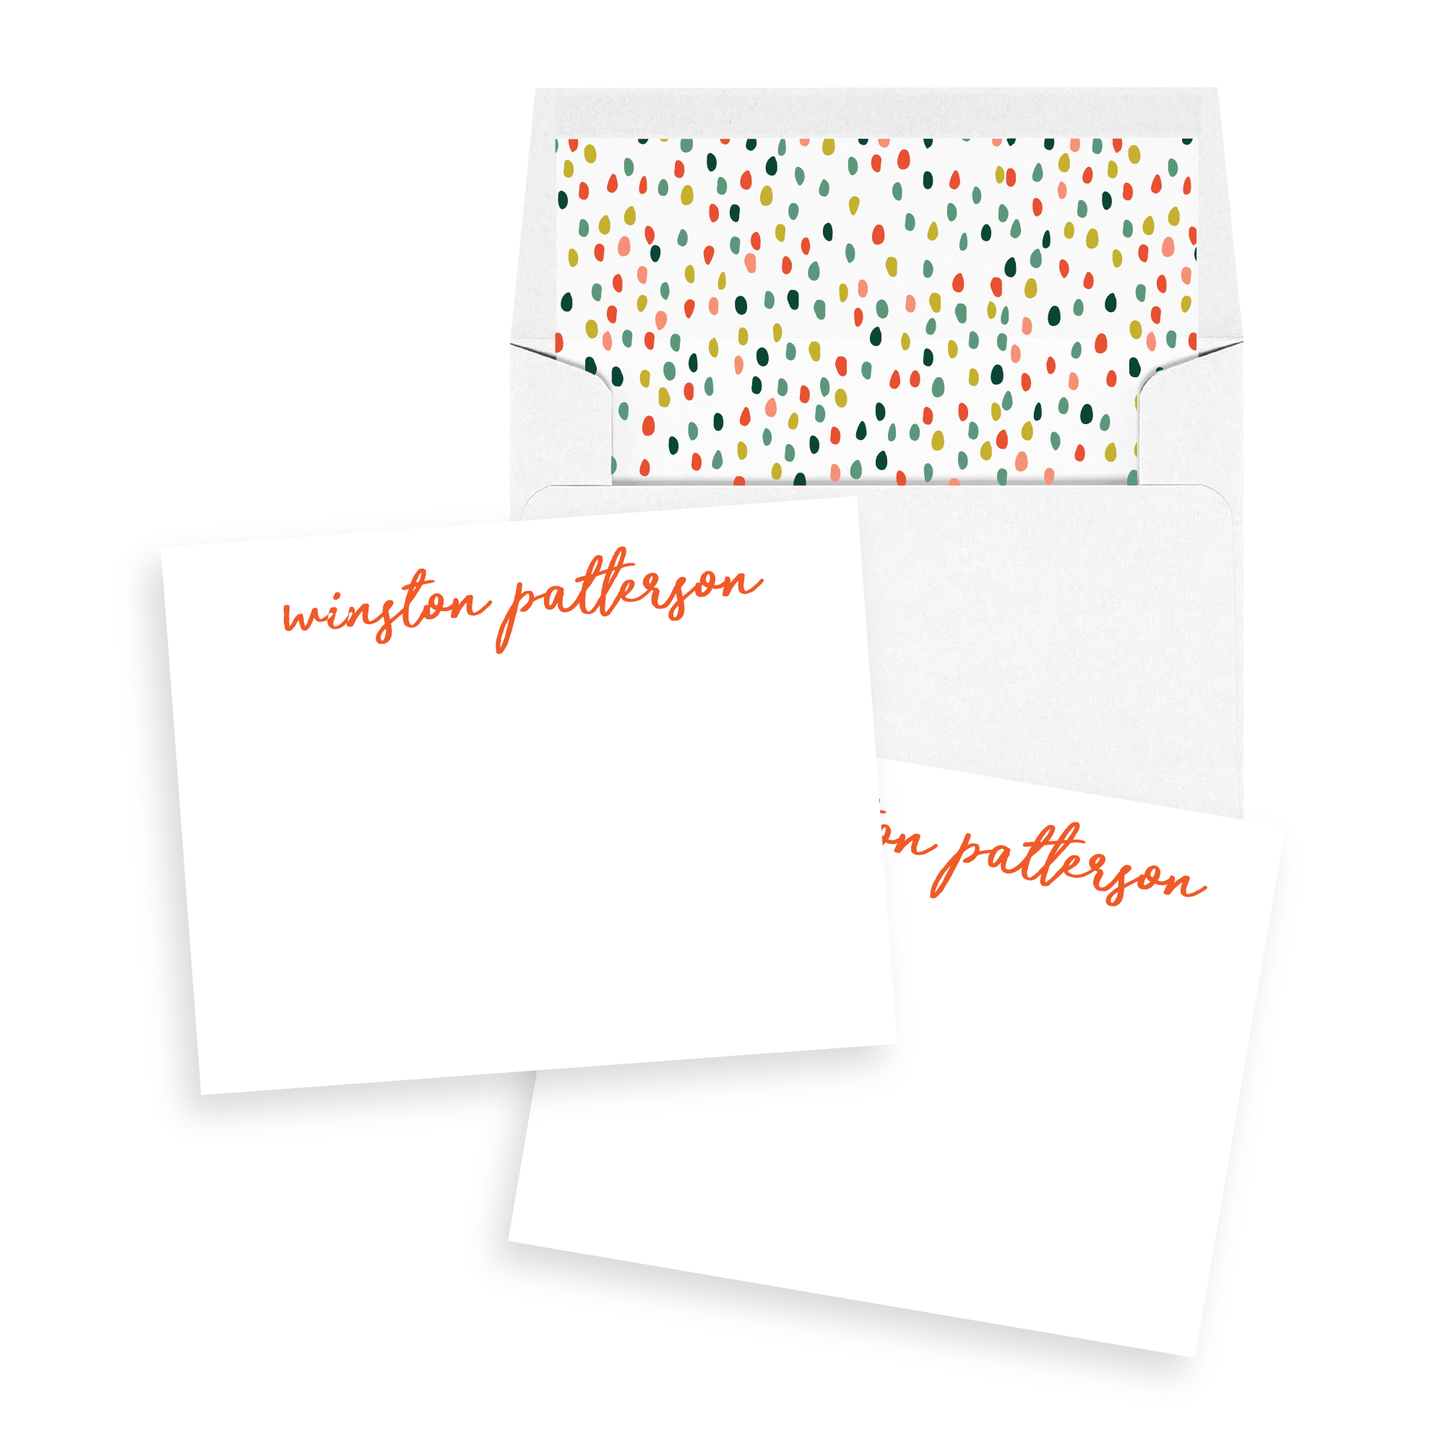 Personalized Stationery Set of 12